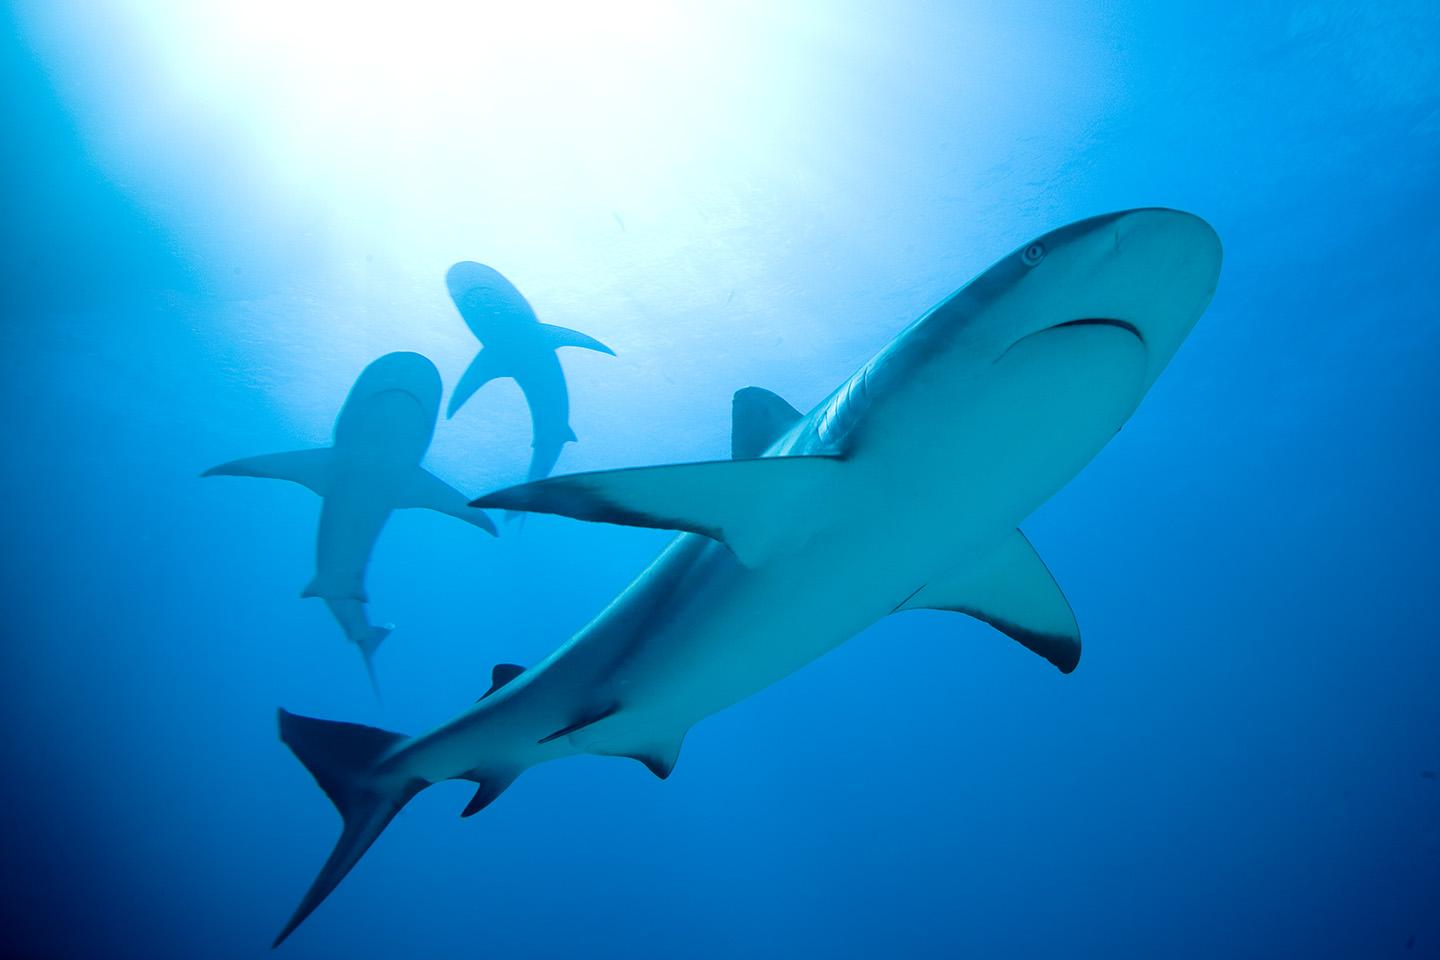 A group of Caribbean reef sharks swims in the Bahamas’ shark sanctuary, which prevents harvesting of shark species anywhere within a 630,000 square-kilometer safe haven of Bahamian waters. (Courtesy Shedd Aquarium)